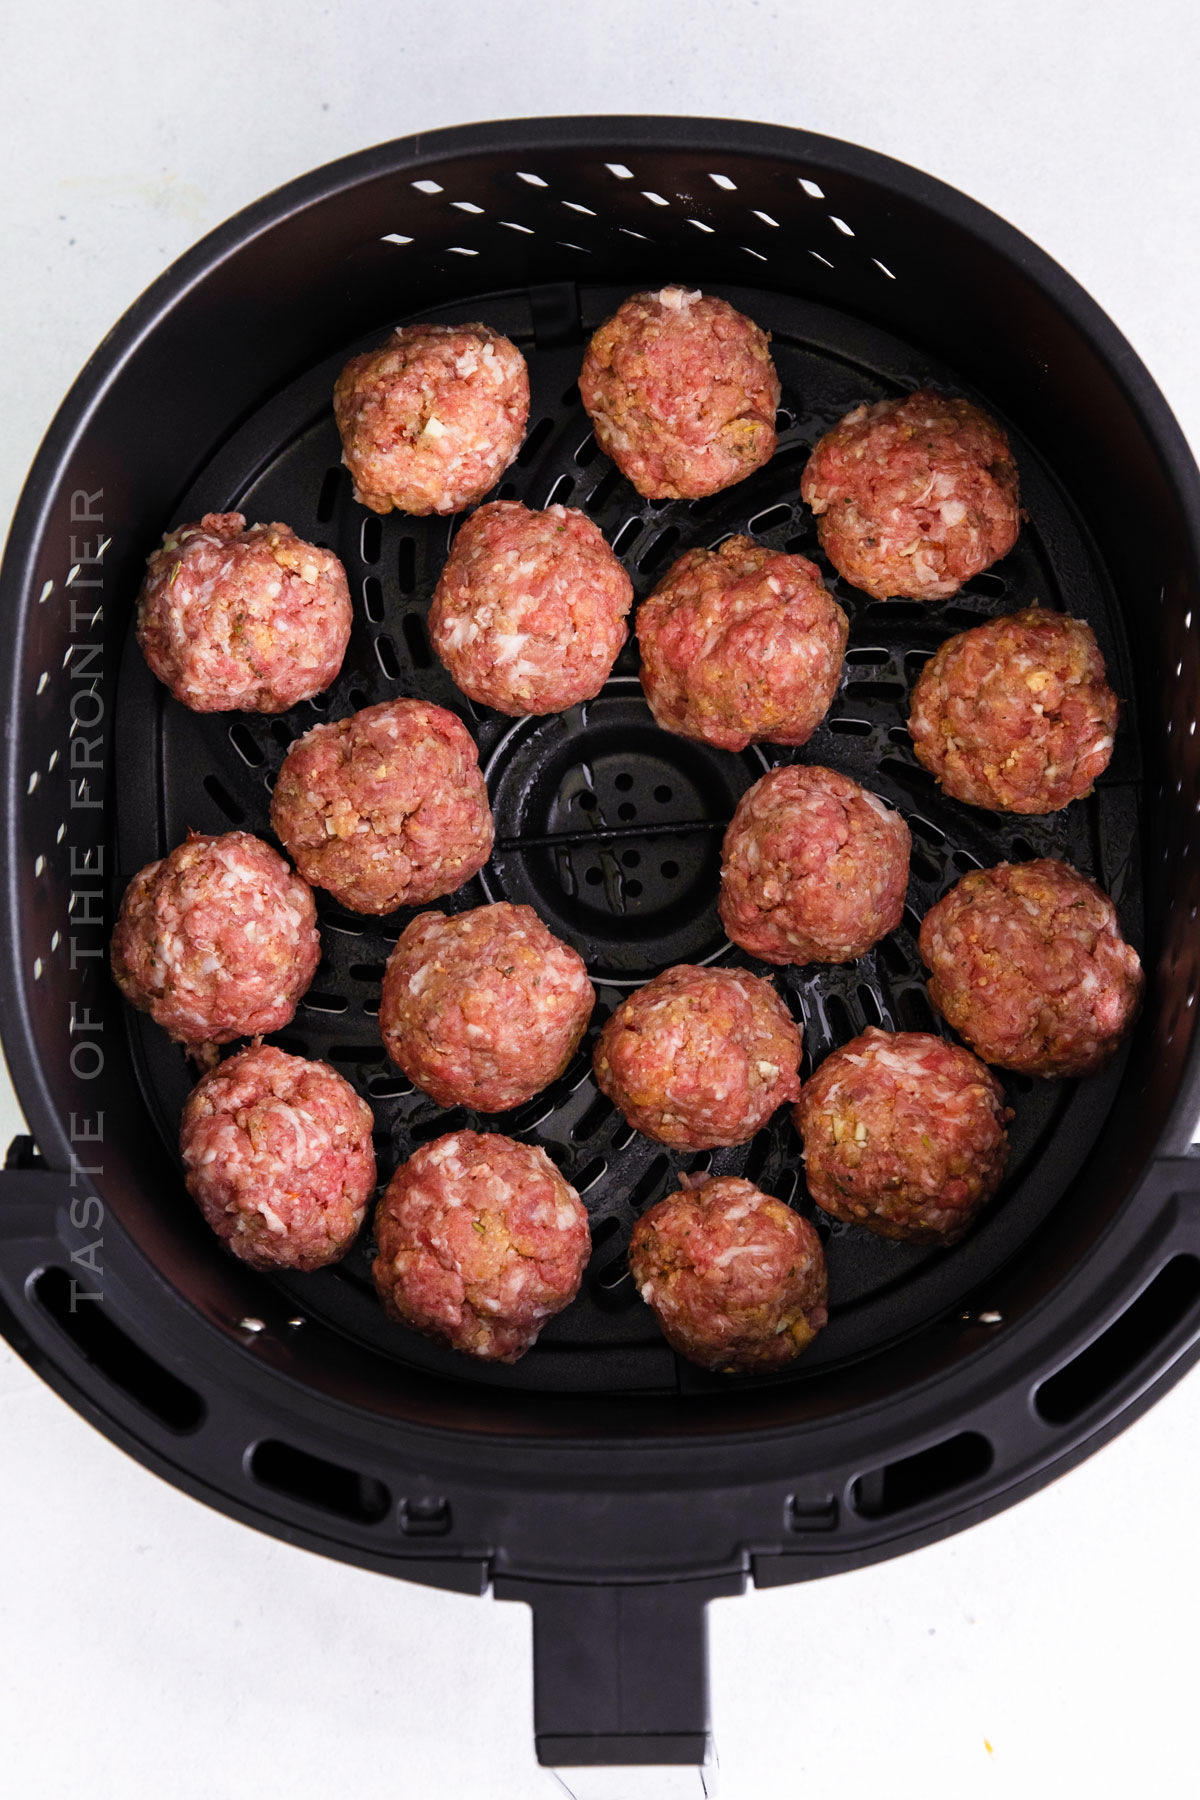 cooking meatballs in the air fryer